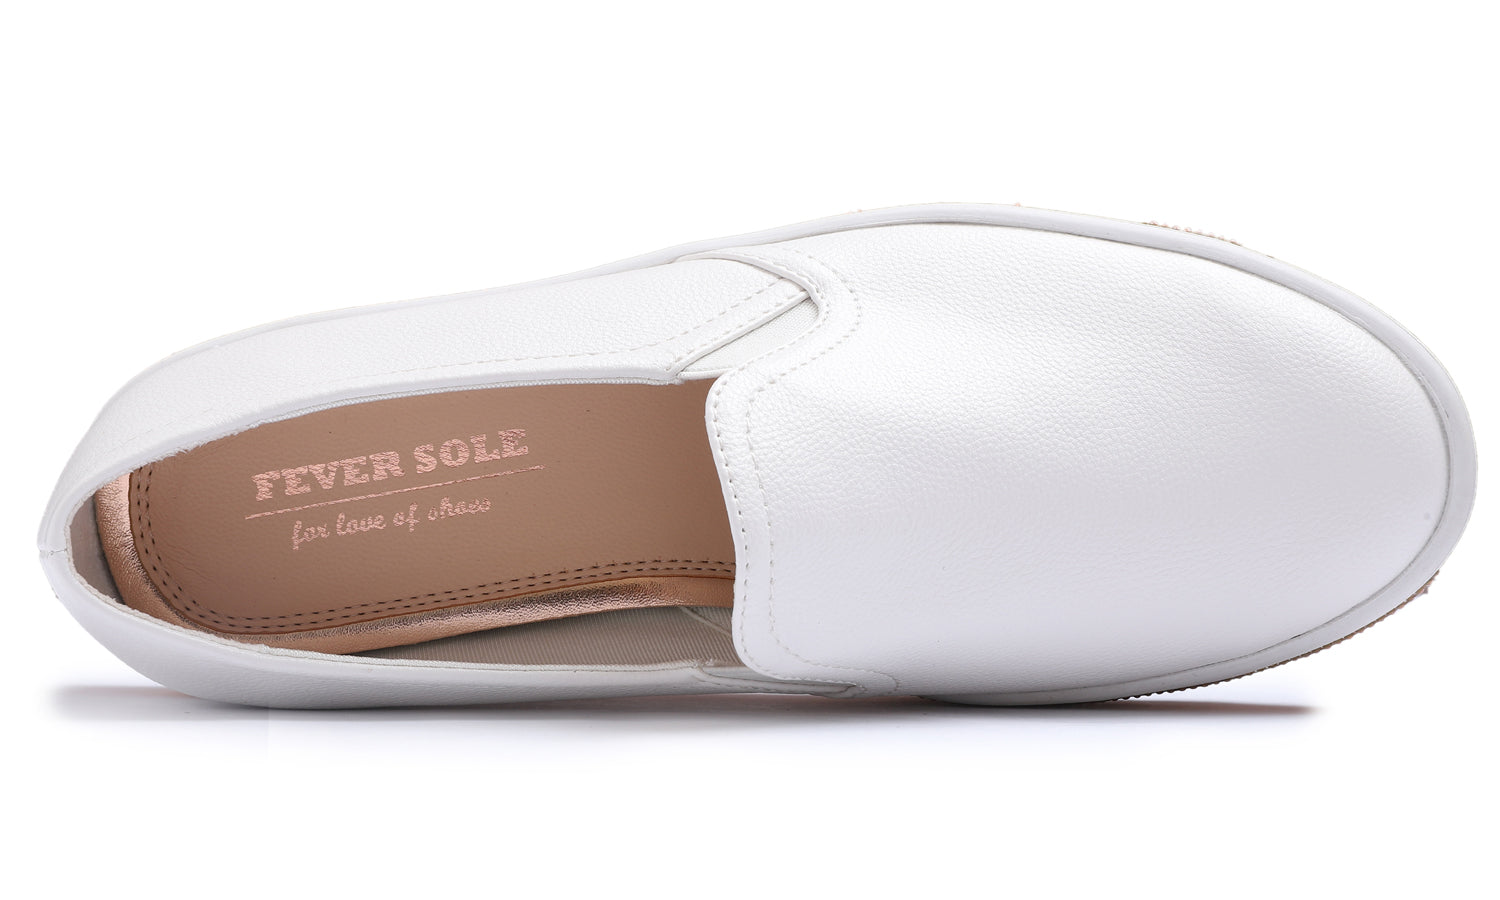 Feversole Women's Fashion Slip-On Sneaker Casual Platform Loafers White Rose Gold Rhinestone Shoes